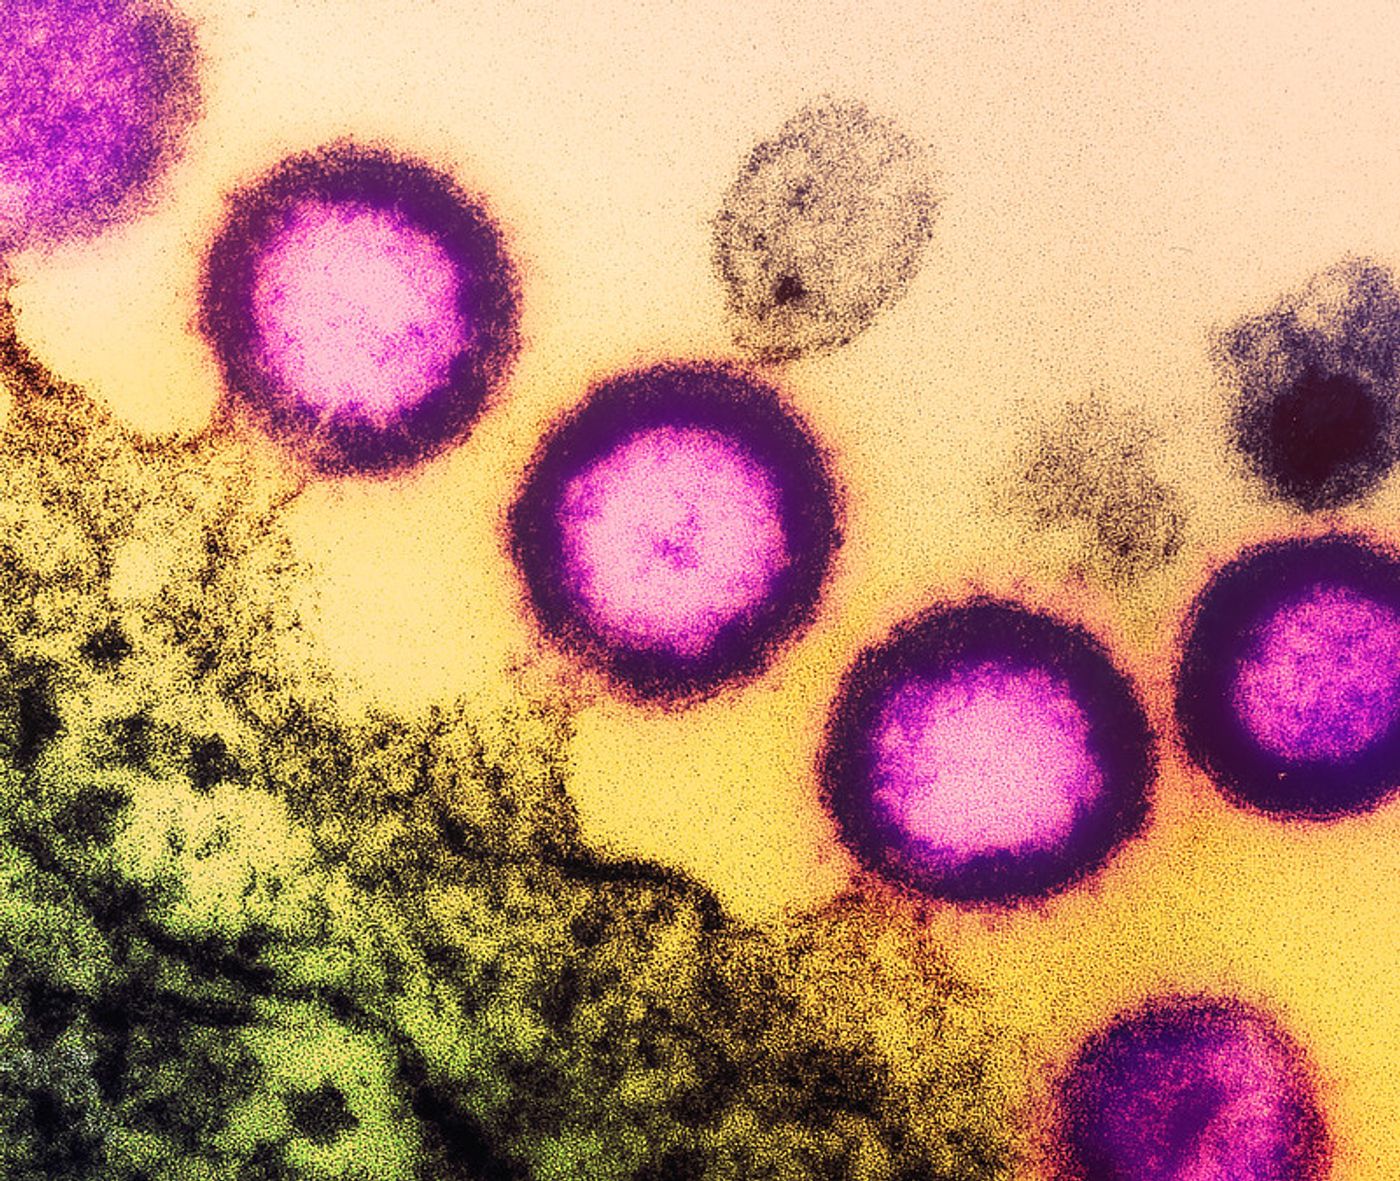 ransmission electron micrograph of HIV-1 virus particles (pink) replicating from the plasma membrane of an infected H9 T cell. Image captured at the NIAID Integrated Research Facility (IRF) in Fort Detrick, Maryland. Credit: NIAID